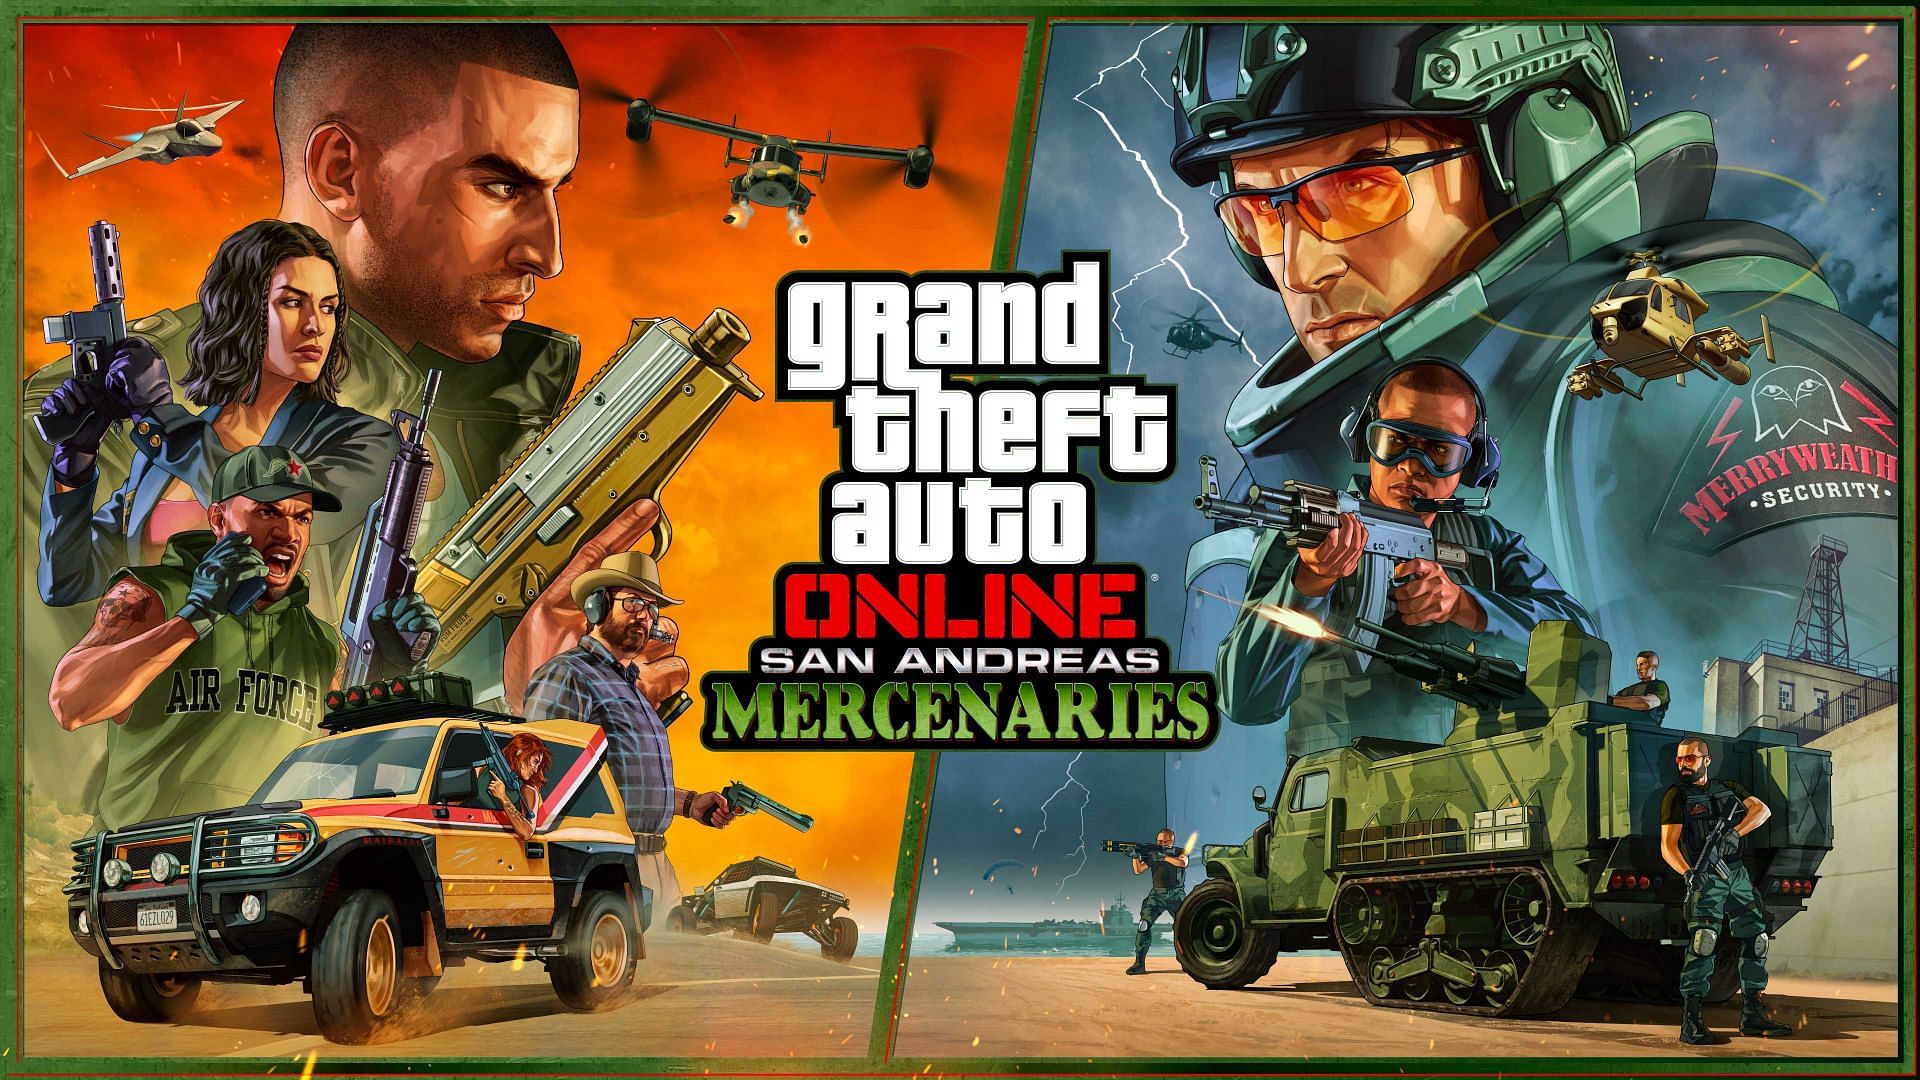 There is a good chance that a new DLC will be announced after this one (Image via Rockstar Games)